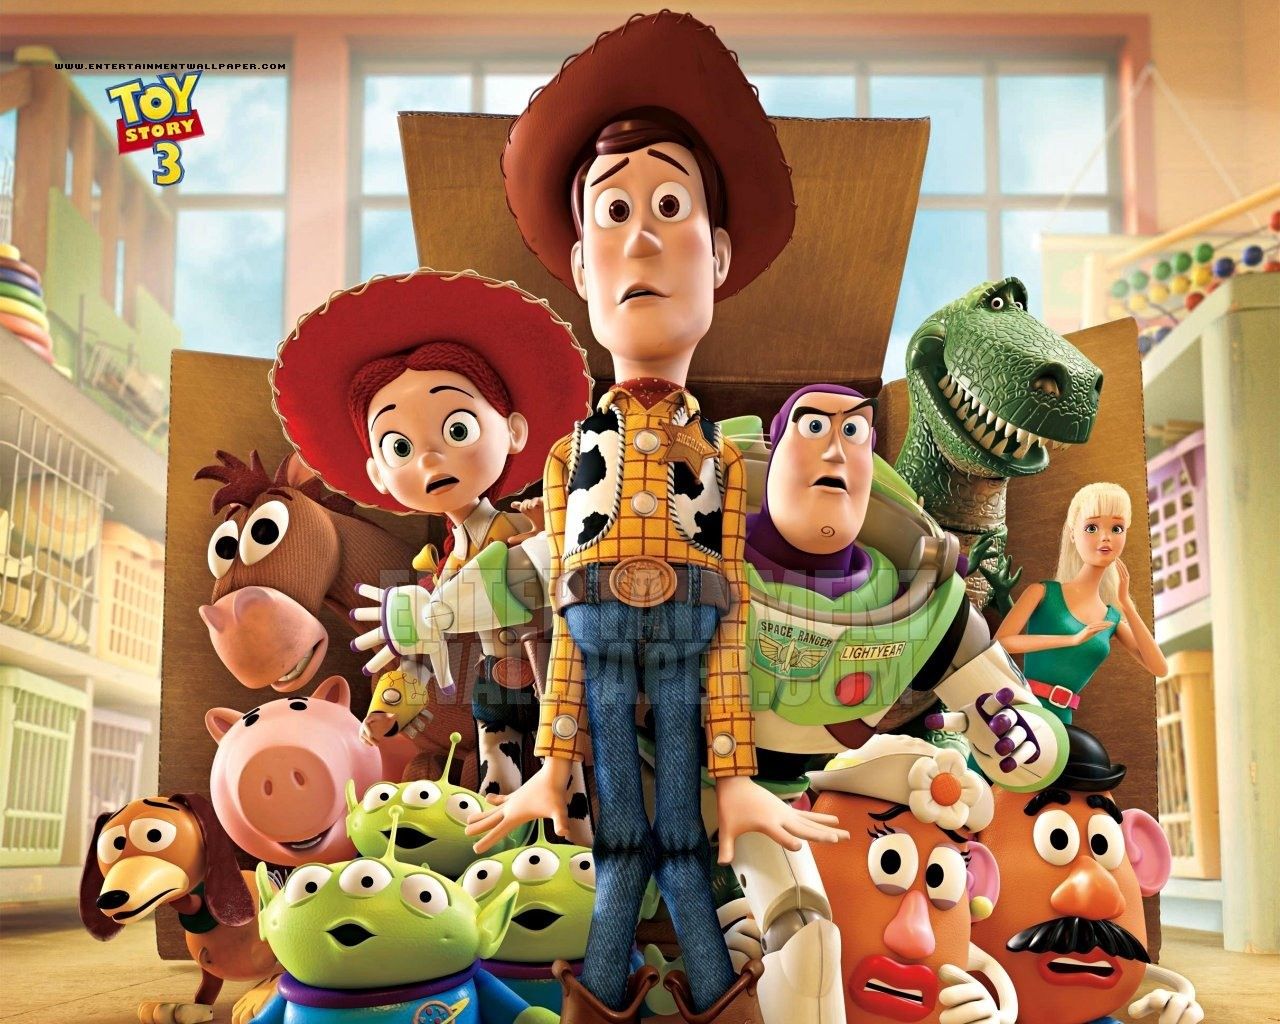 Toy Story Wallpapers 0.34 Mb - 4USkY